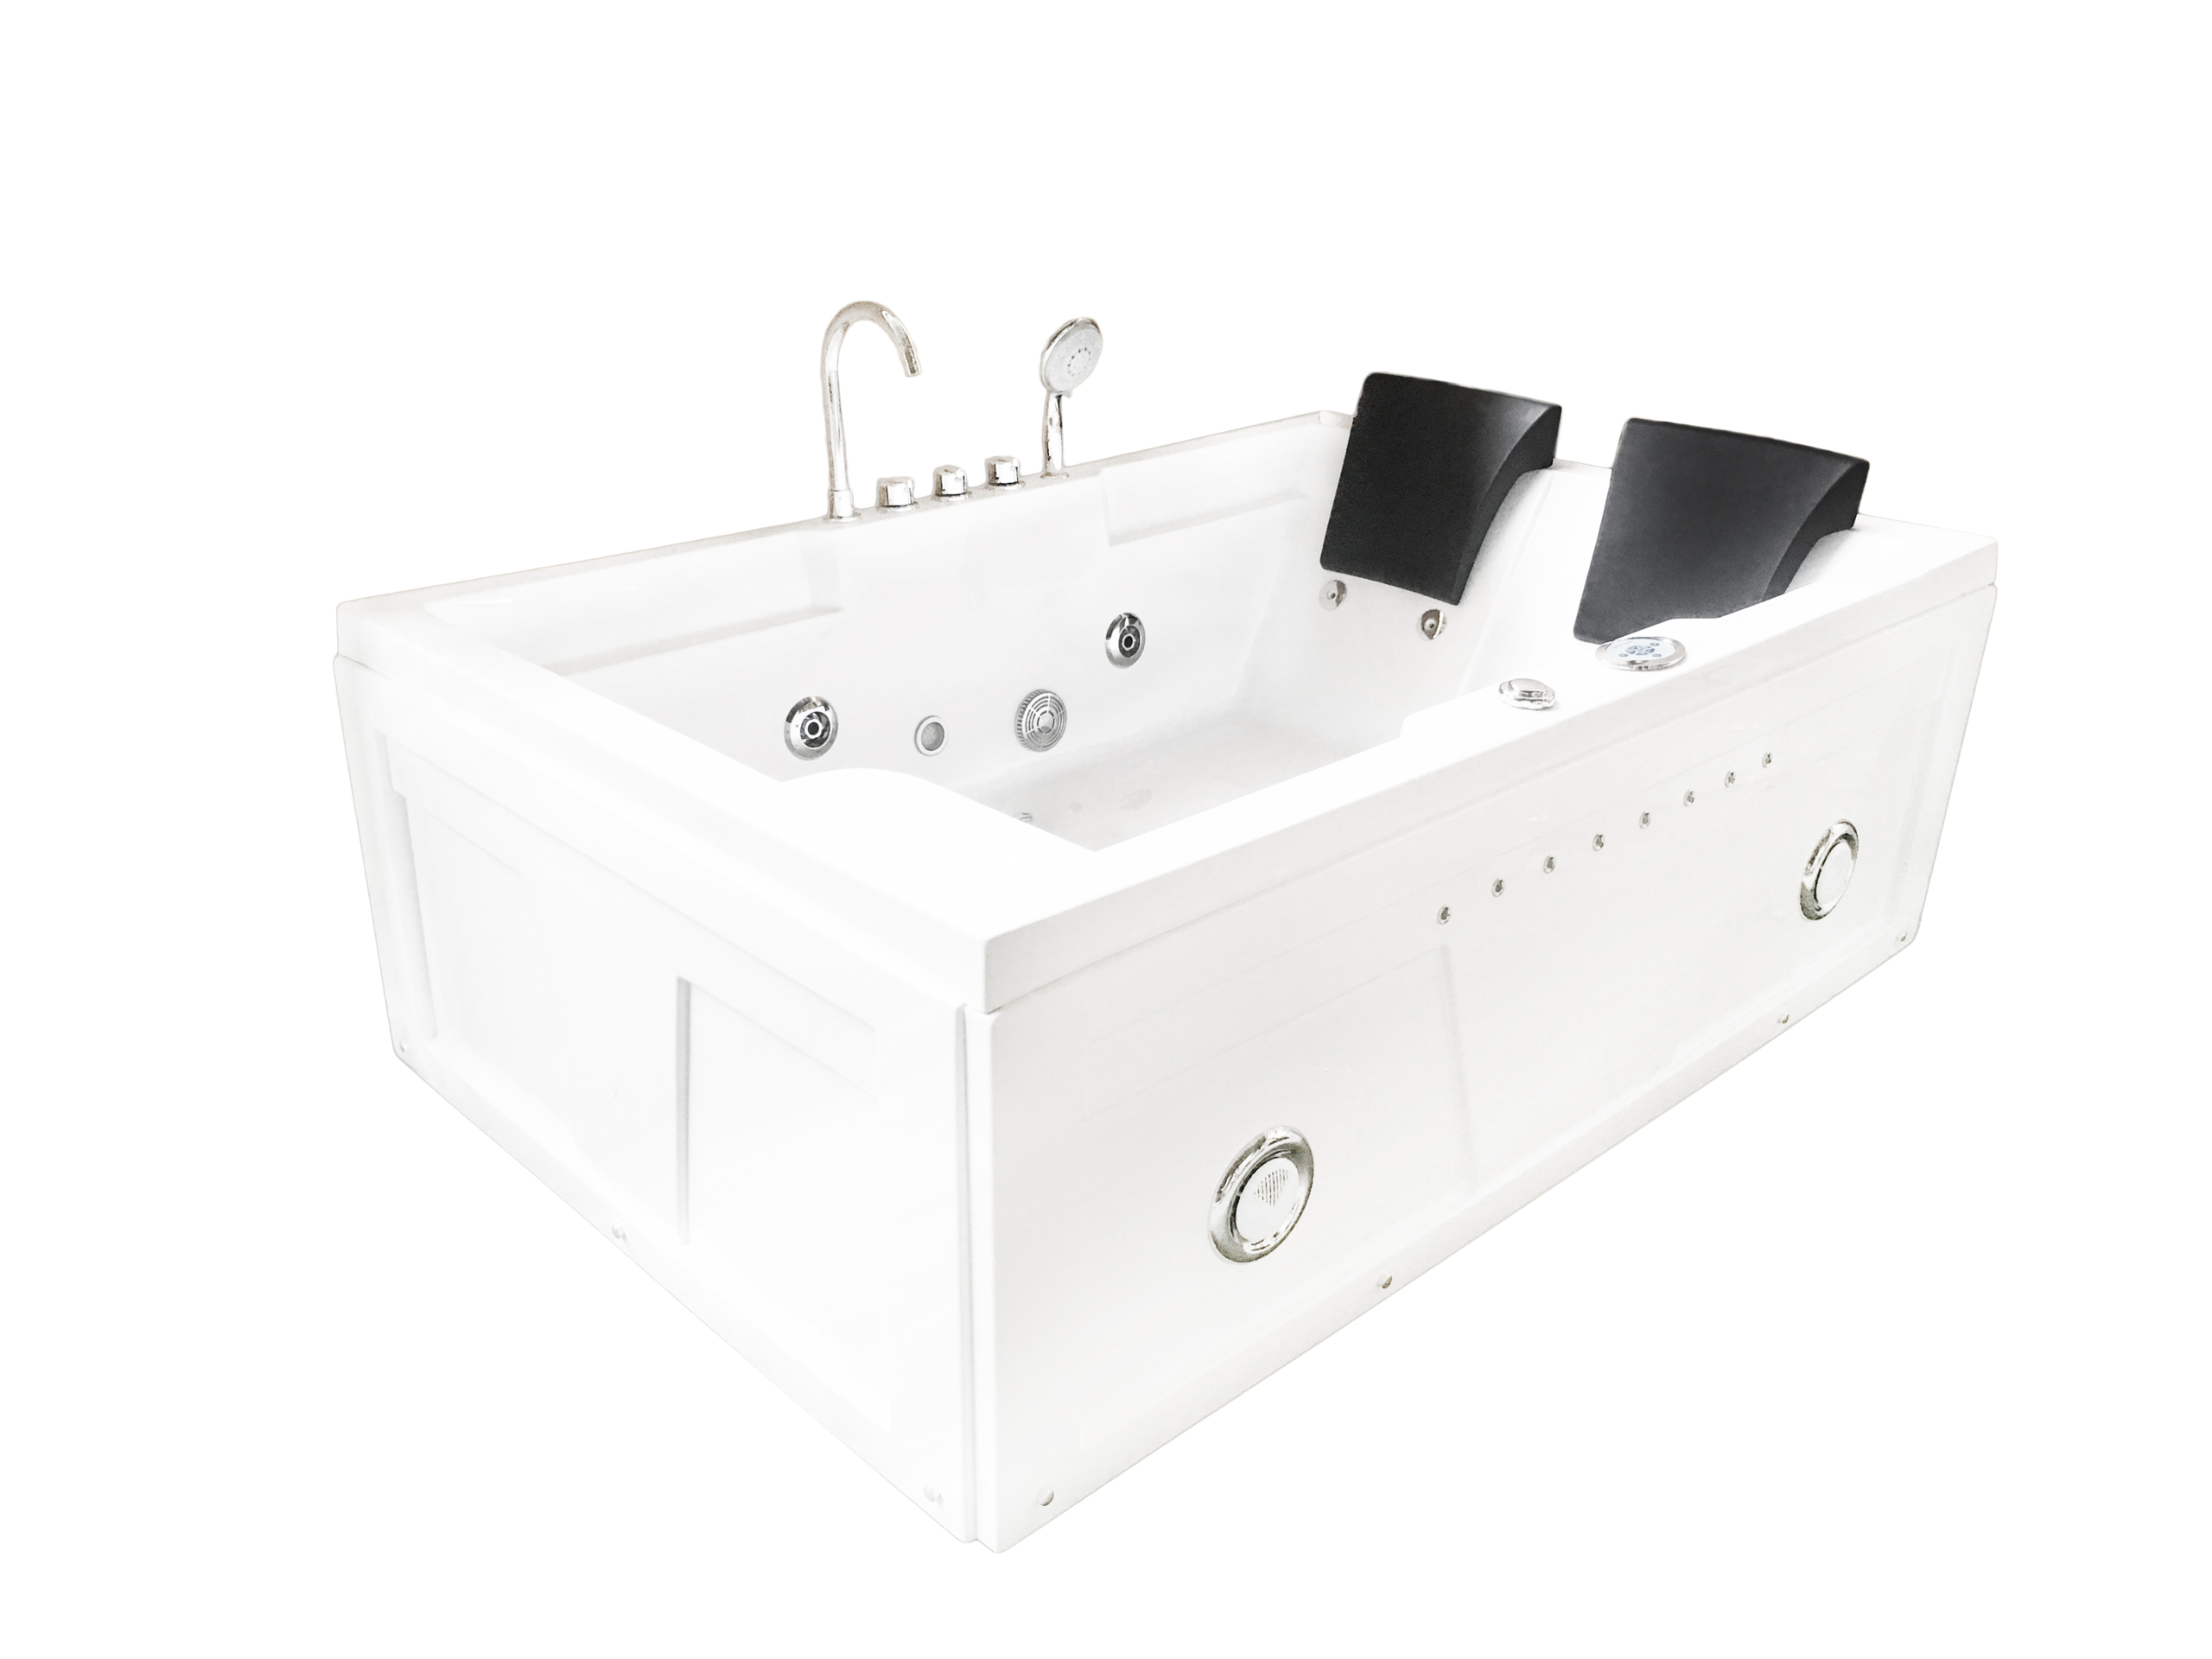 American Hydro Systems 2-person whirlpool tub - materials - by